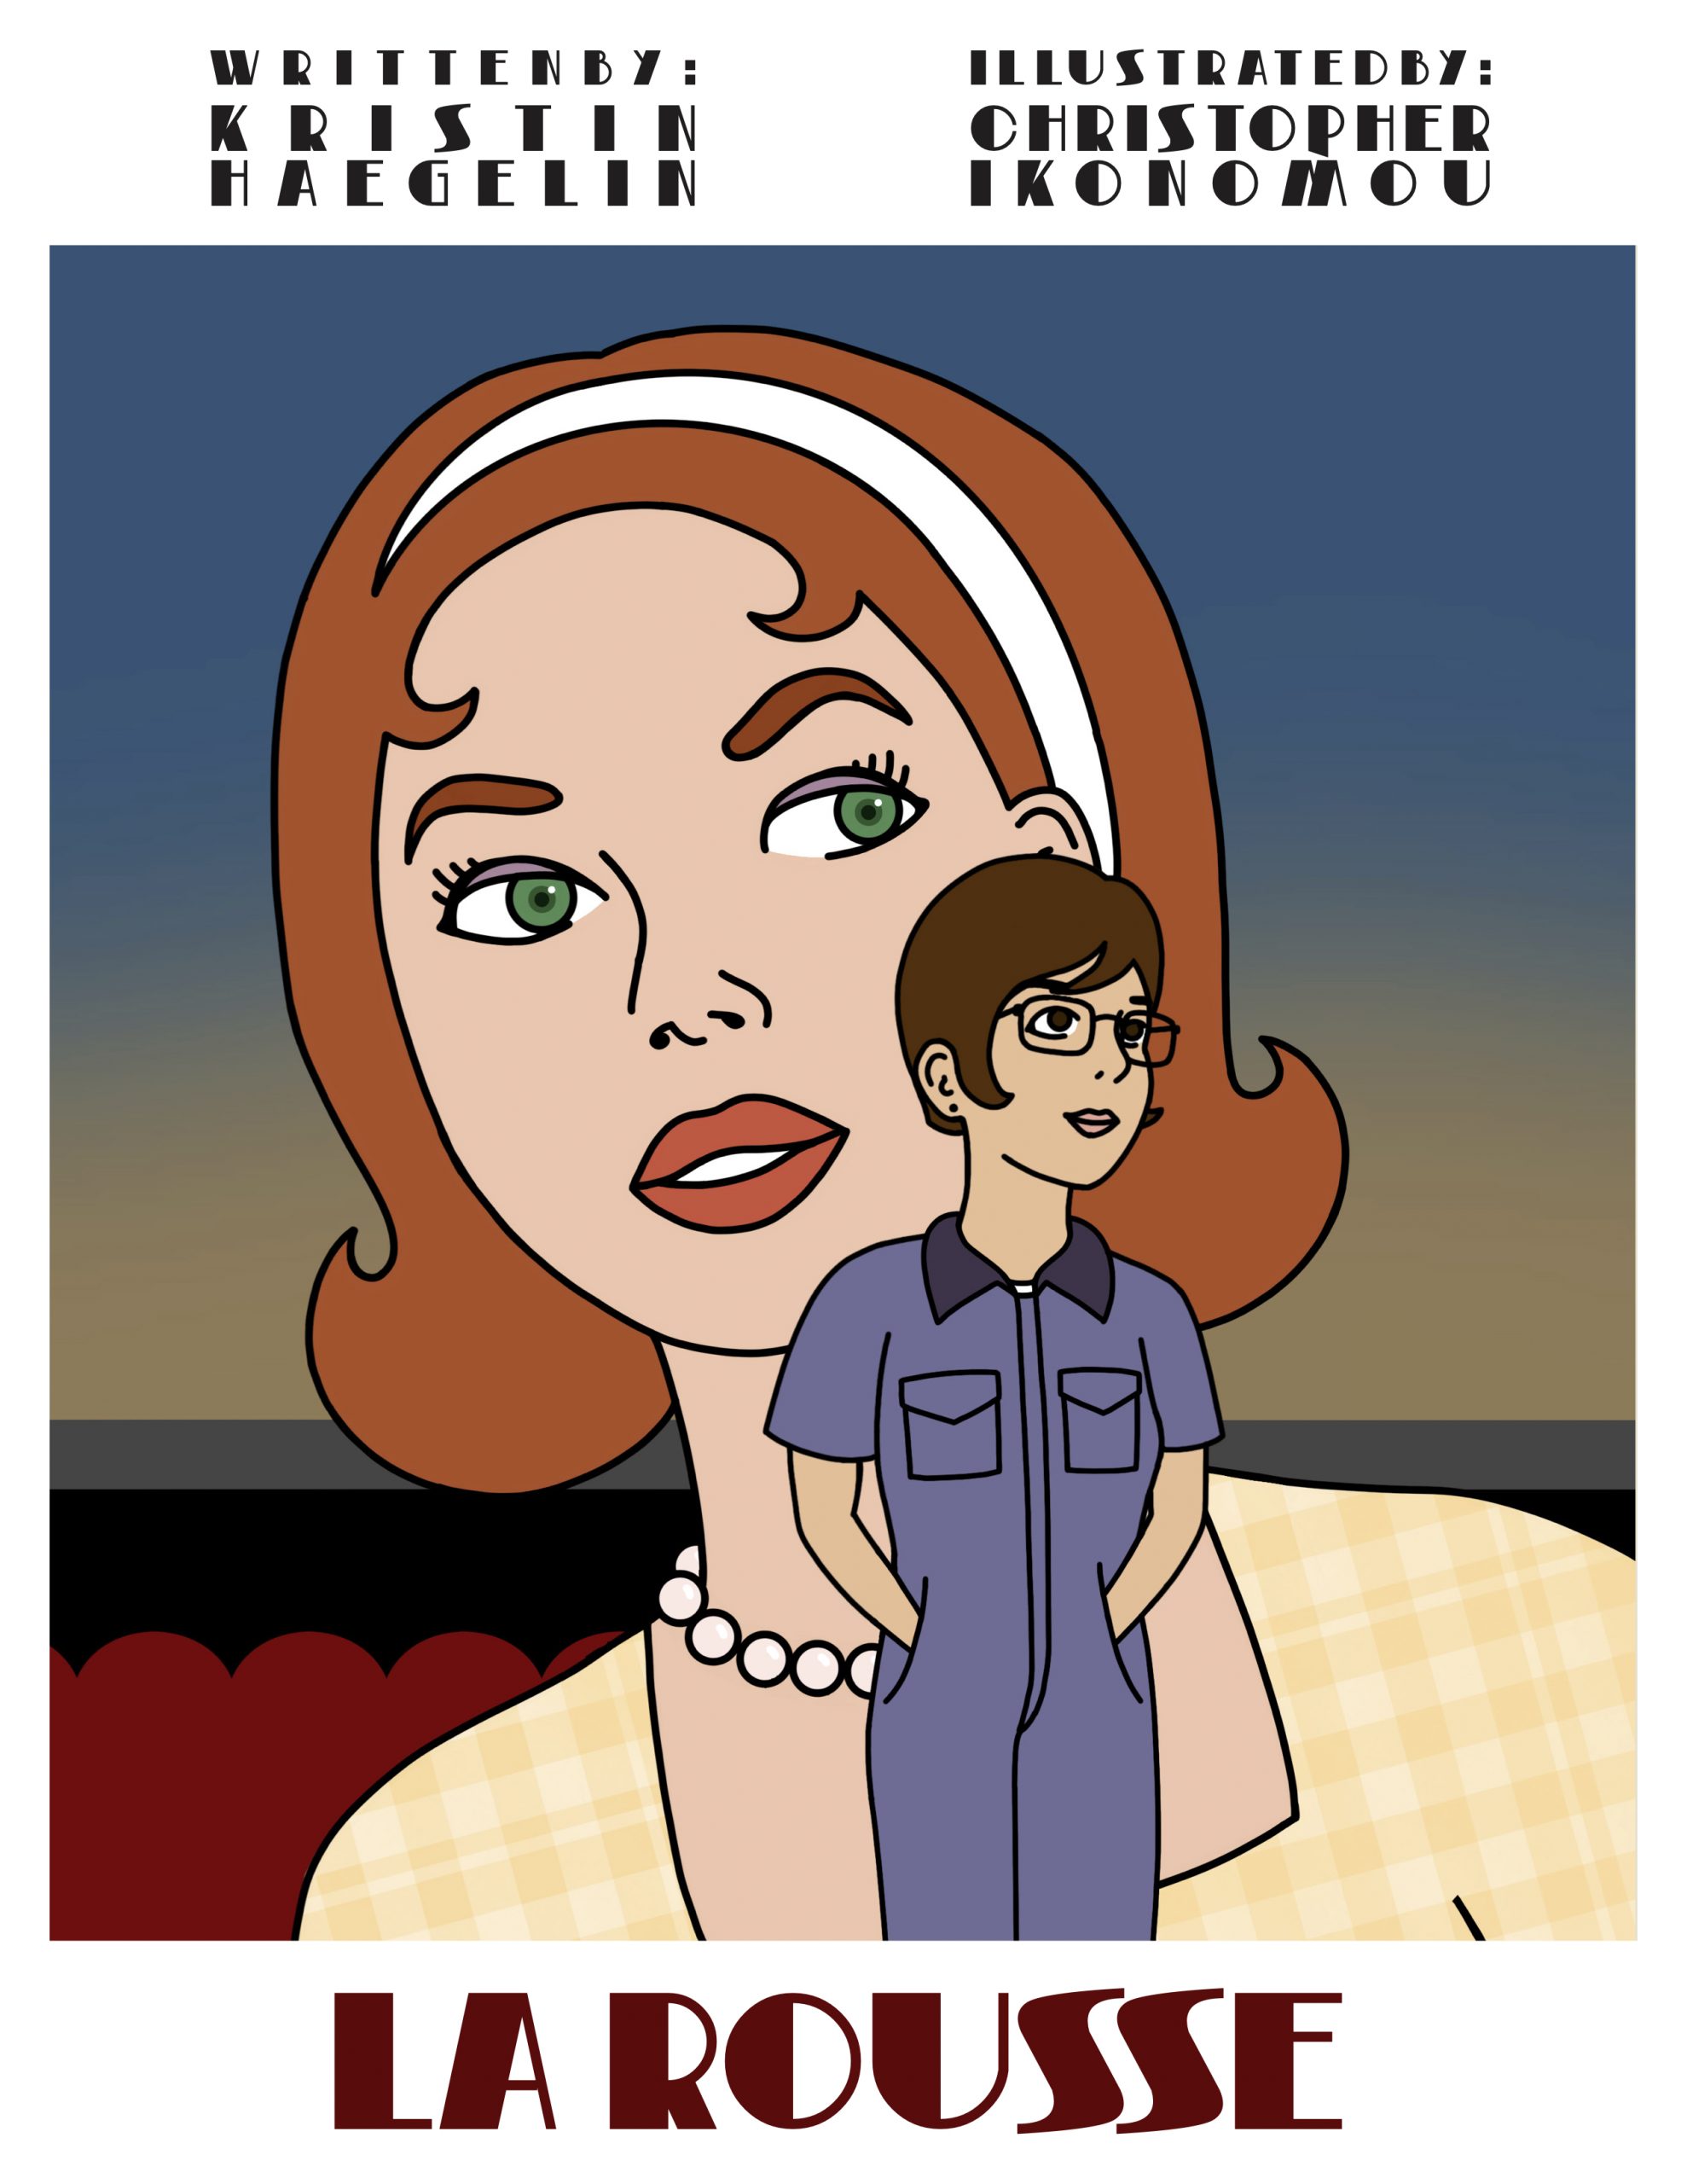 simple illustrated 50s movie poster depicting a red-haired woman with a white headband, green eyes, pearl necklace, and yellow gingham dress behind a tan brunette with glasses and purple coveralls. behind them is a blurred interior of a movie theater. written by kristin haegelin, illustrated by christopher ikonomou. la rousse.